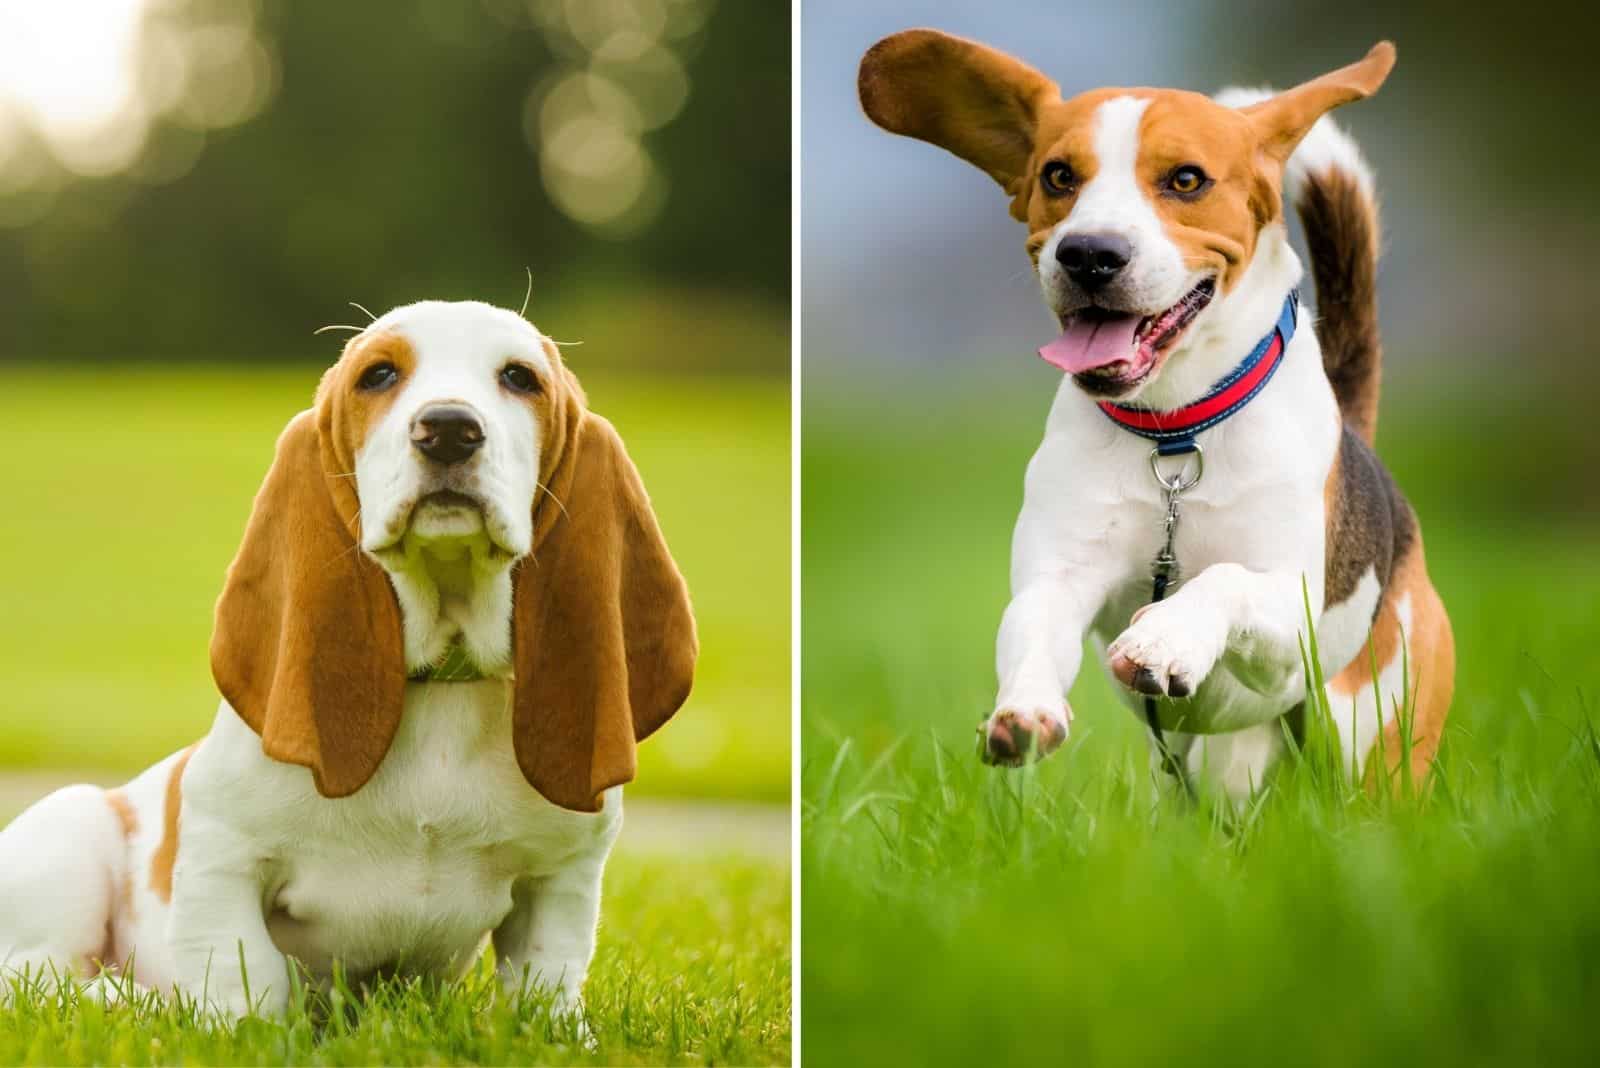 Basset Hound Vs. Beagle: Which One Is The Breed For You?